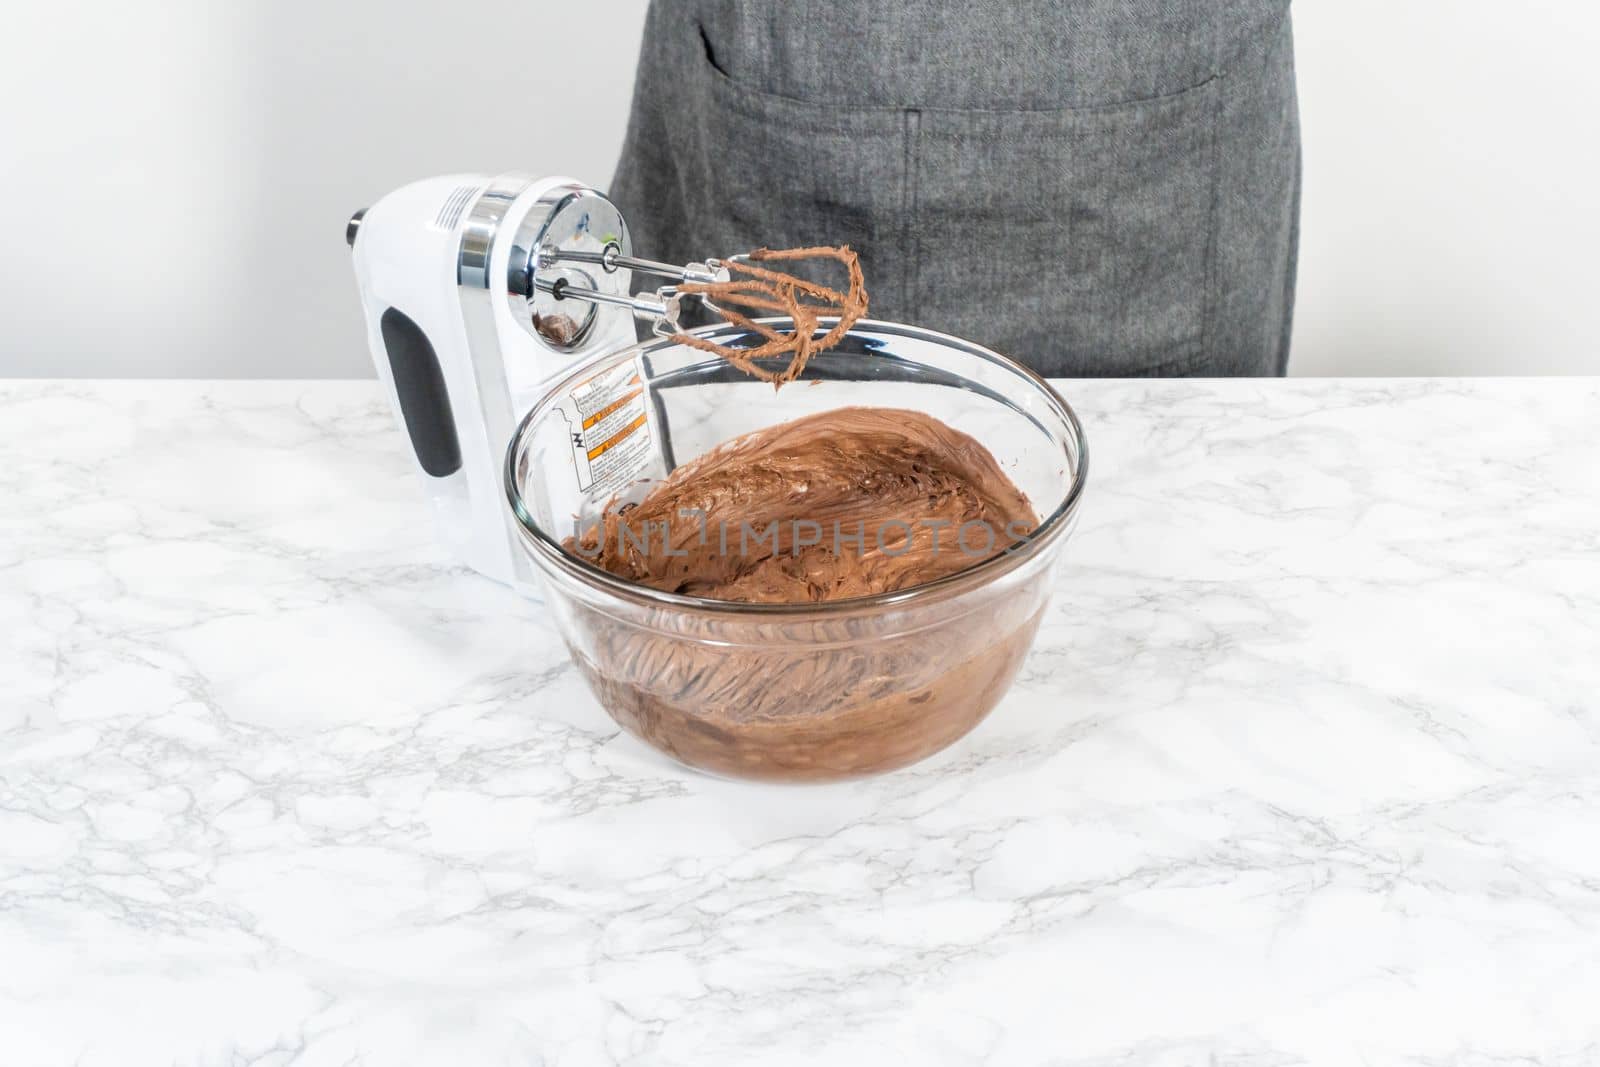 Mixing store-bought chocolate frosting in a mixing glass bowl with a hand mixer.